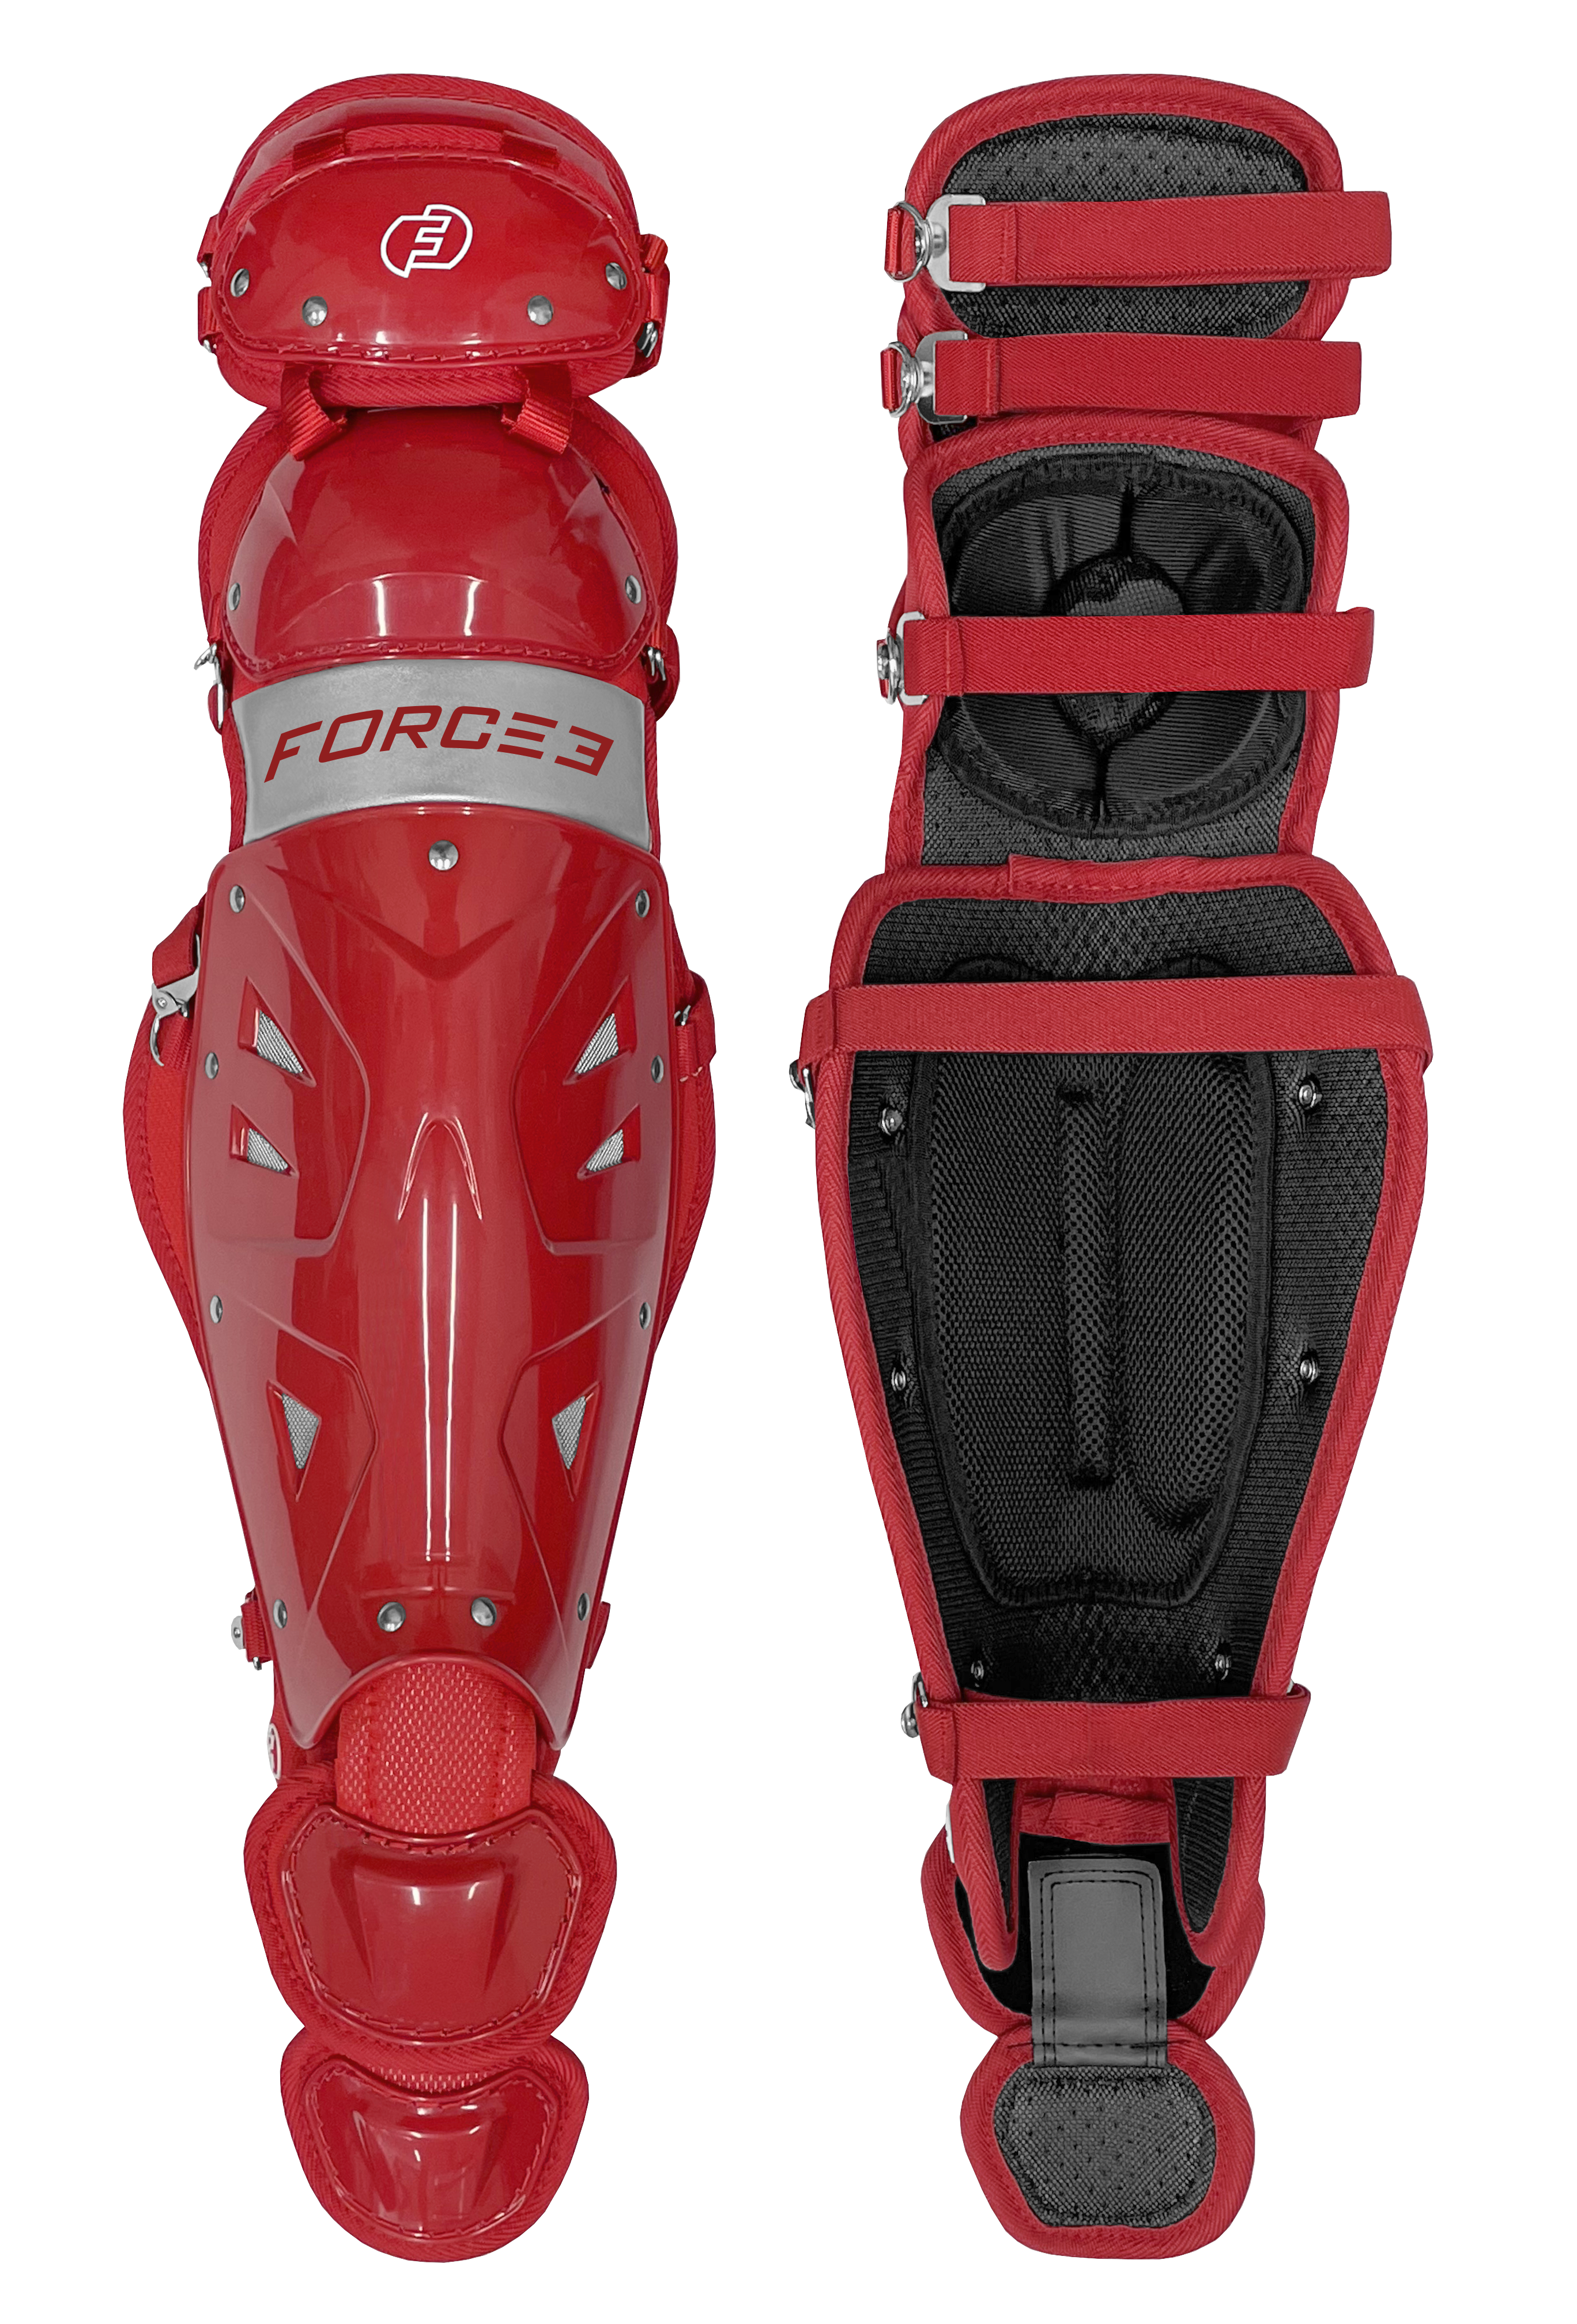 Force3 Youth | Pro Gear Catcher Shin Guards with Dupont Kevlar - Pro Game Sports